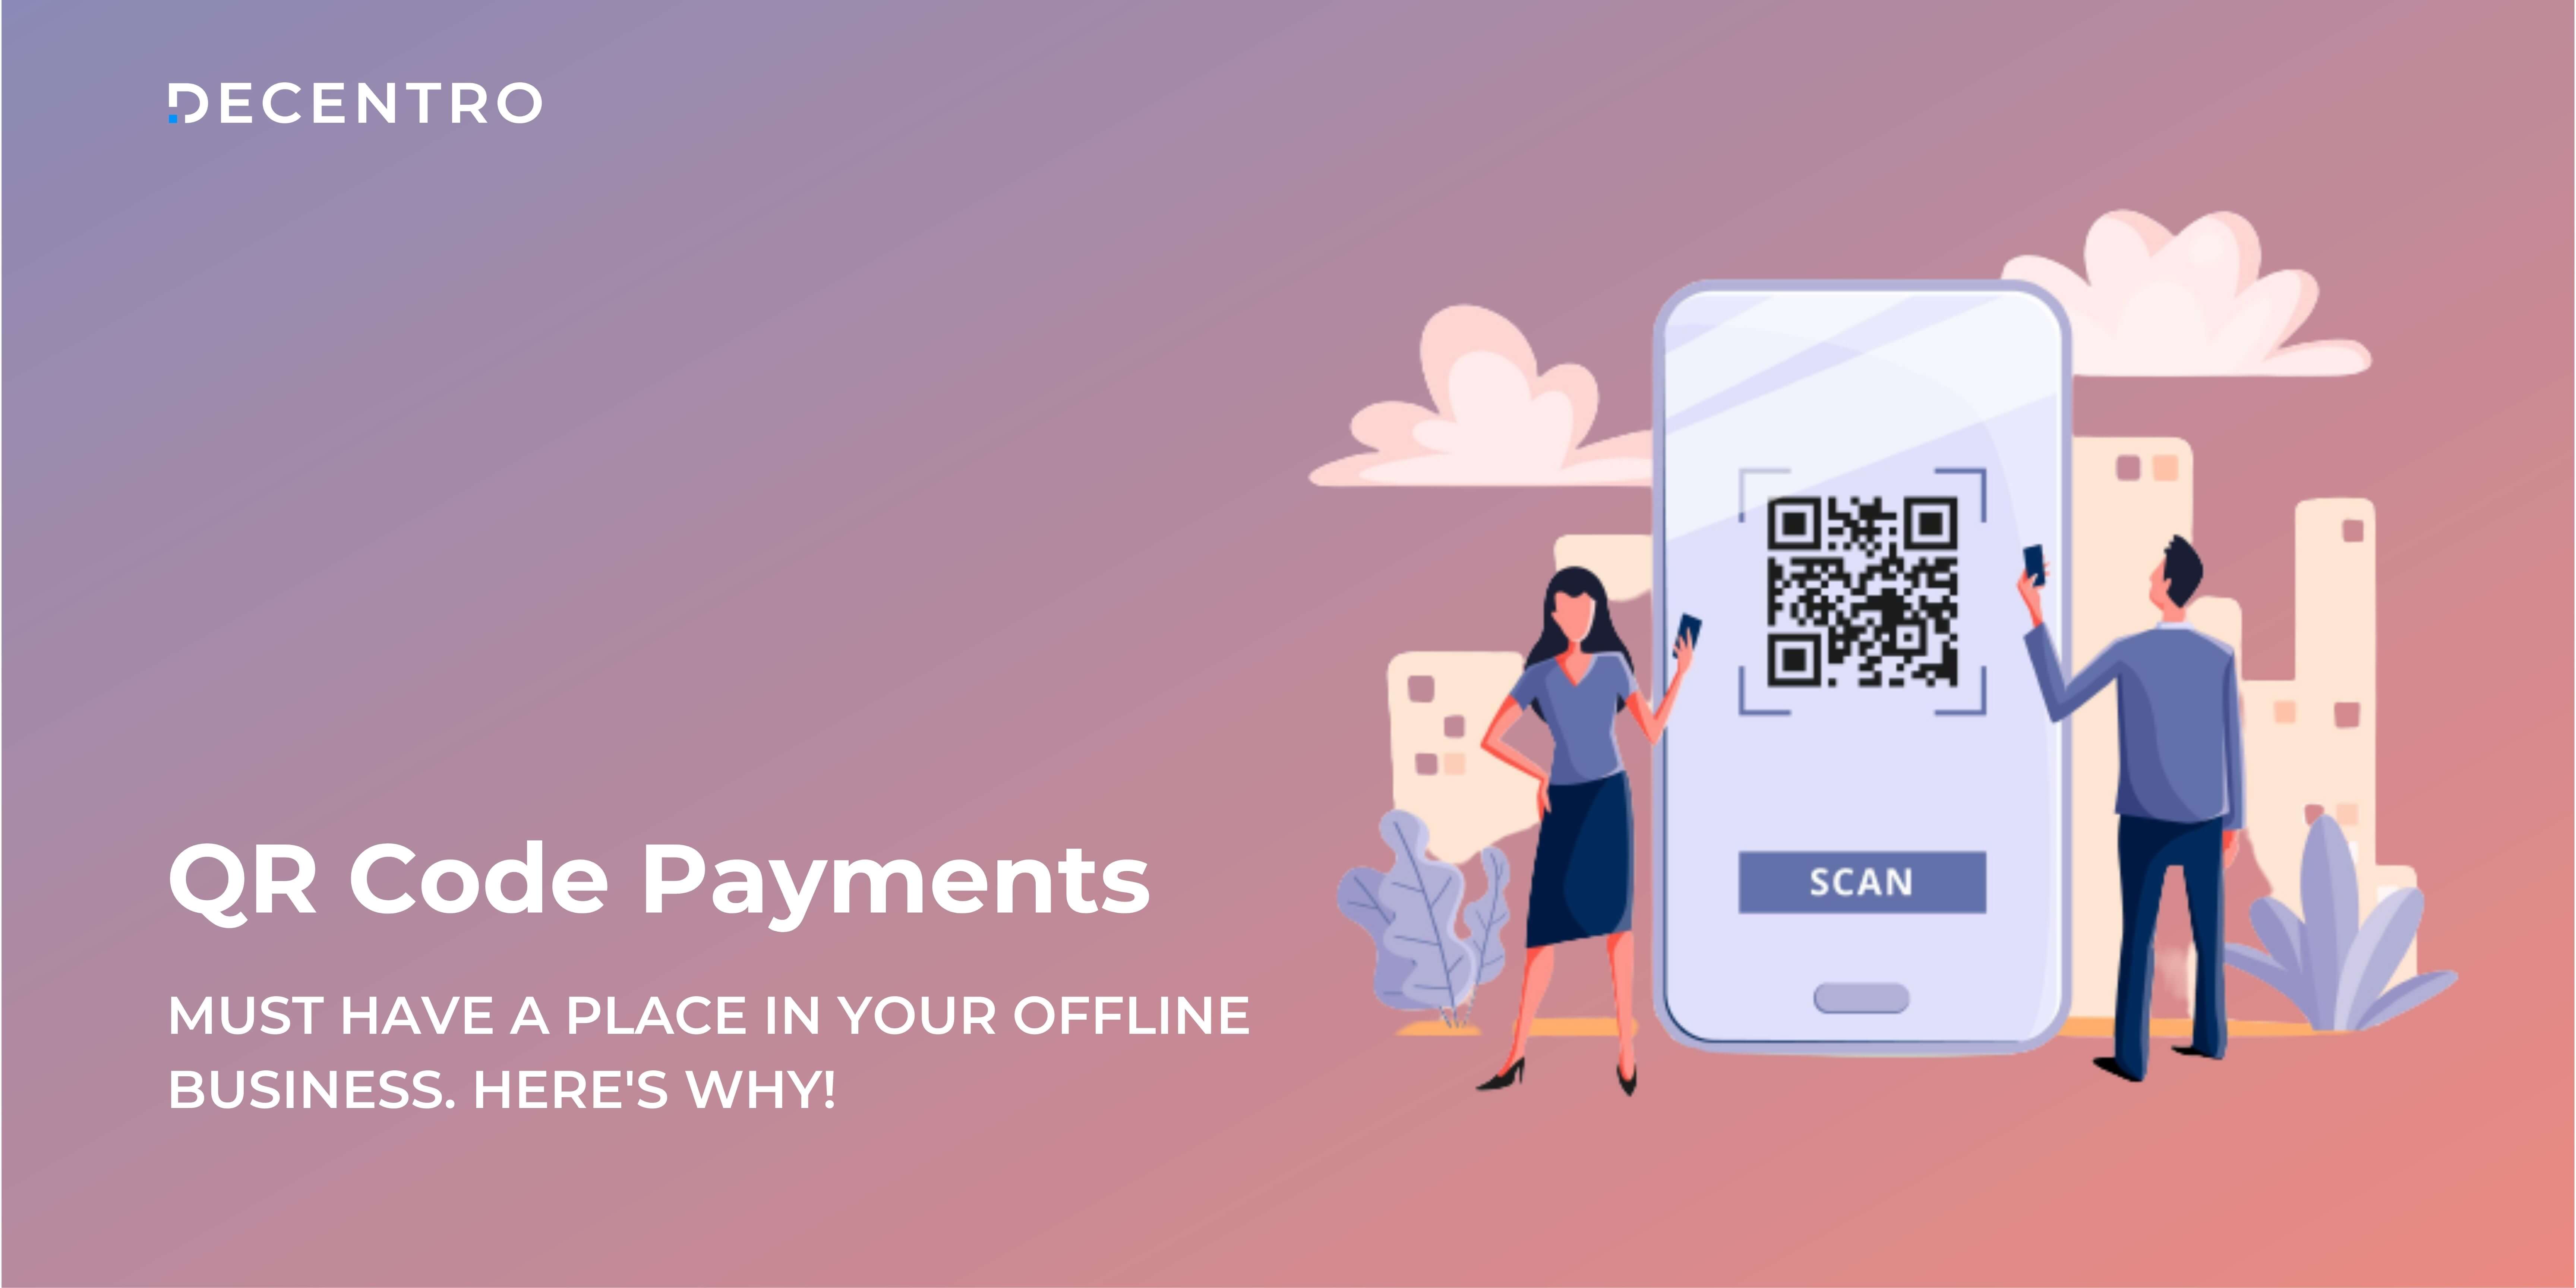 Learn all about QR code payments for your offline business with Decentro.